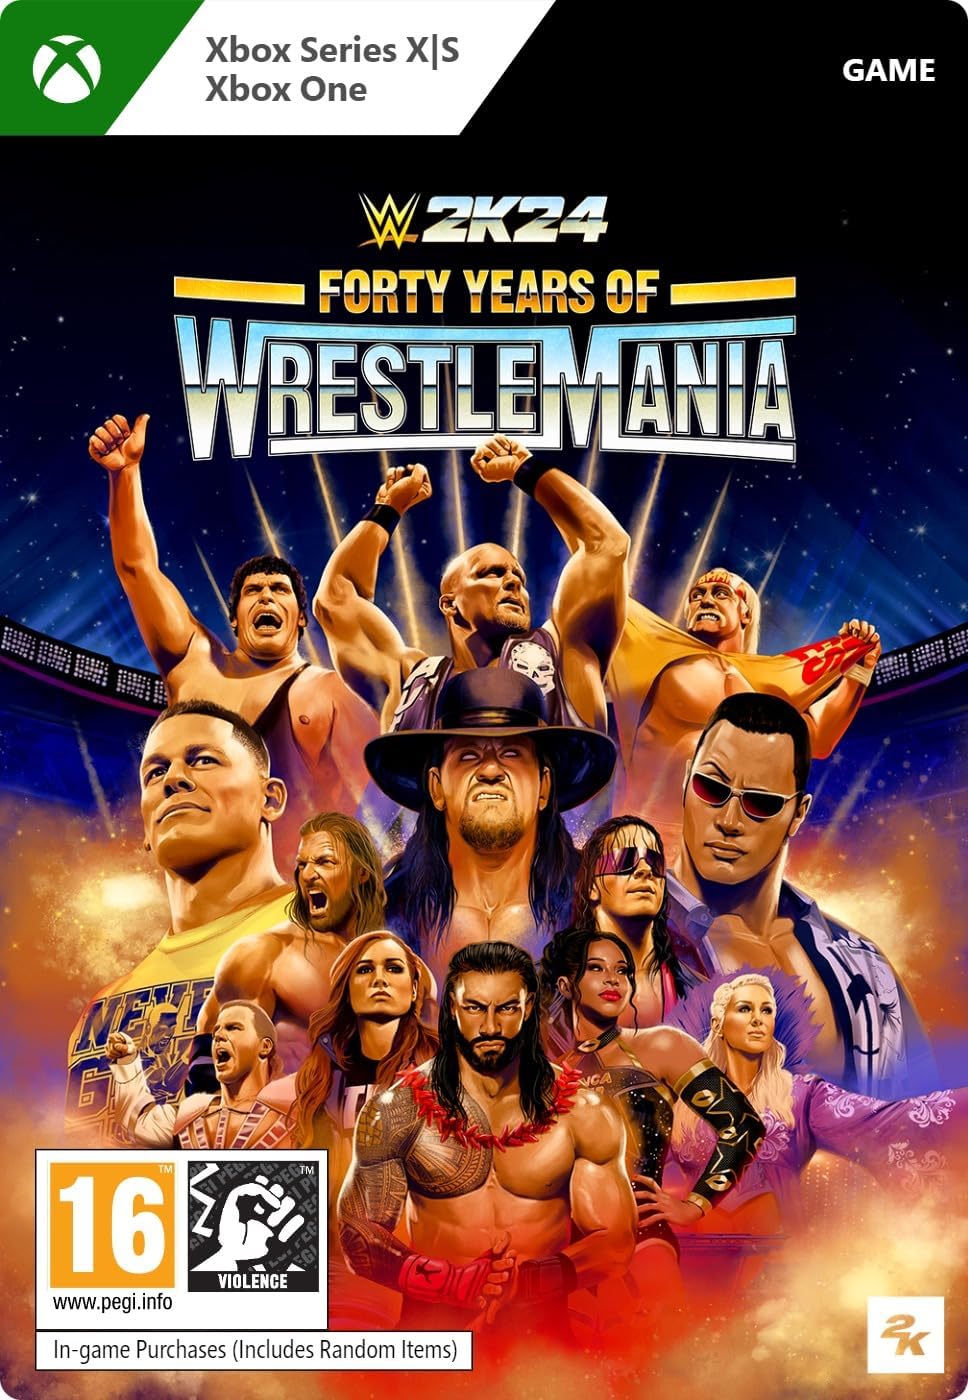 WWE 2K24: 40 Years of Wrestlemania Edition Digital Download Key (Xbox One/Series X): VPN Activated Key